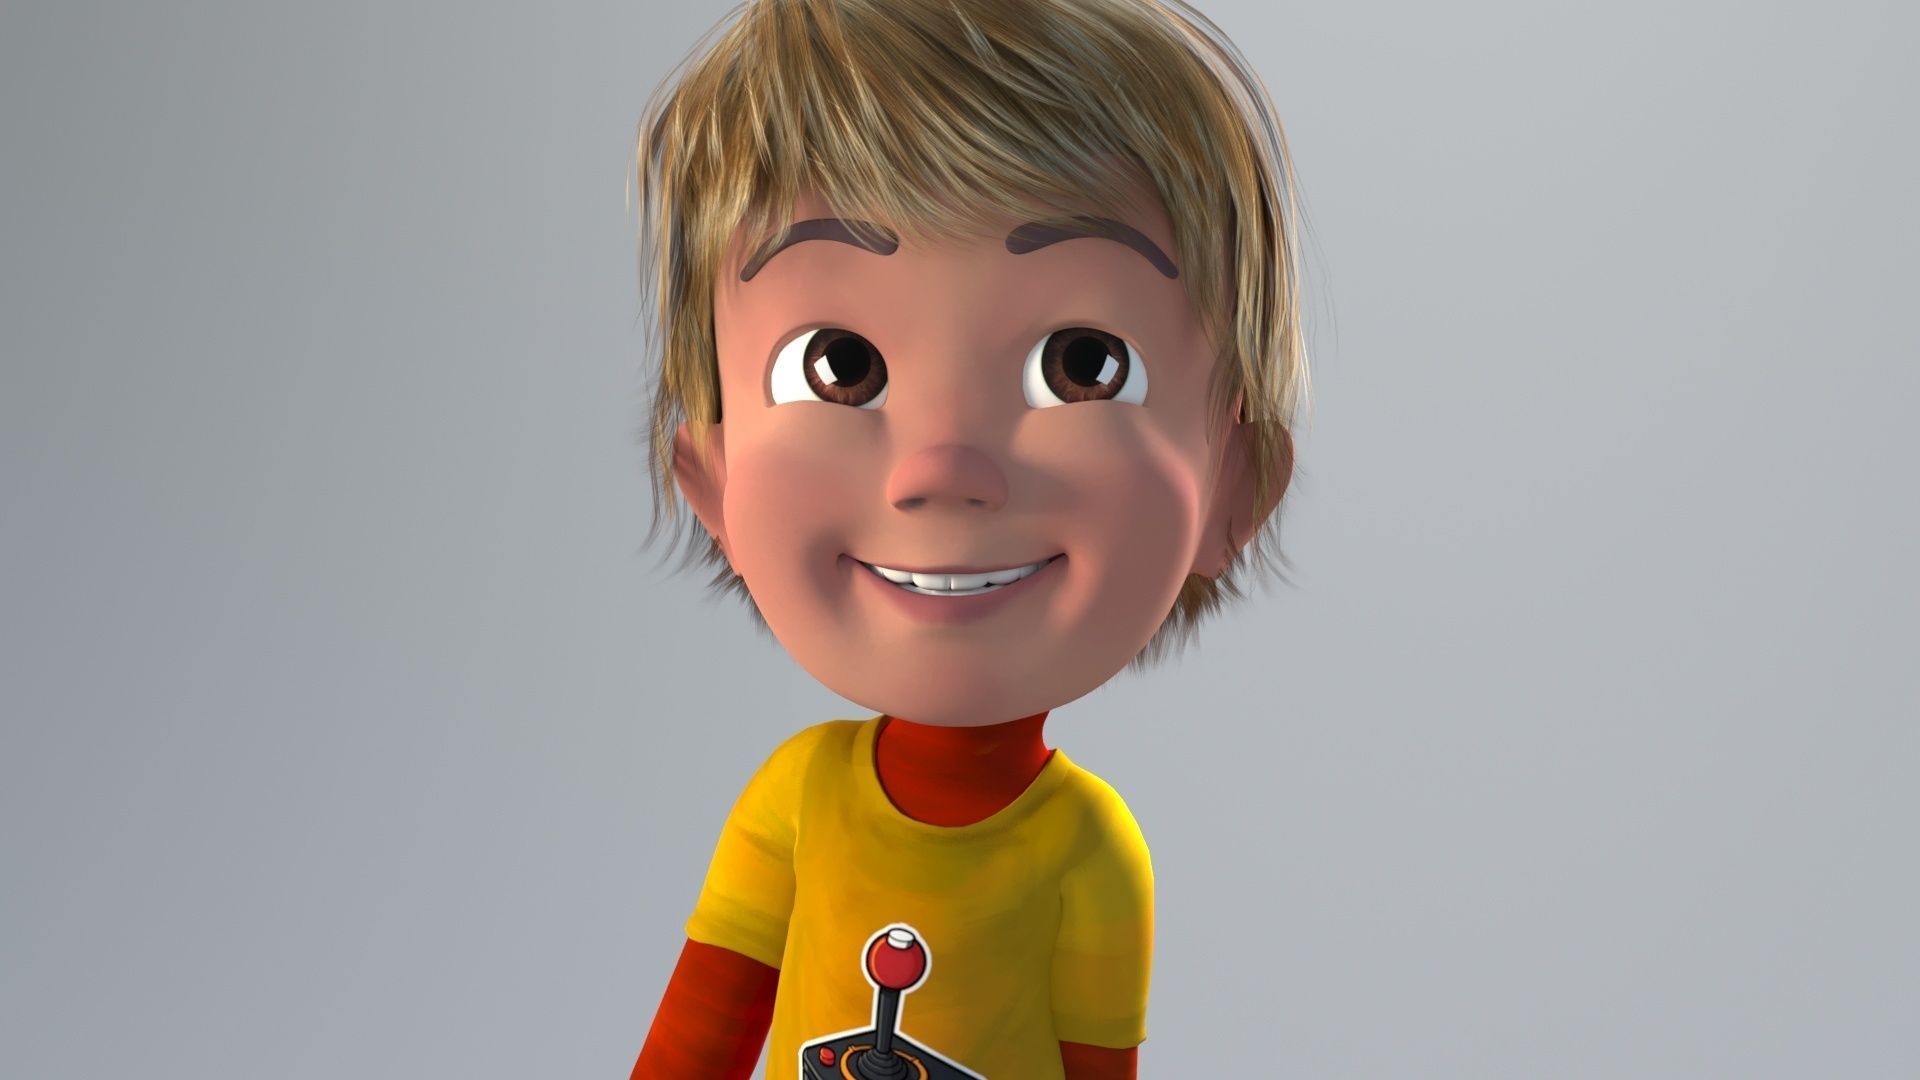 TOON CHARACTER PACK - 21 RIGGED CHAR 3D model - Model 3D Download For Free 8